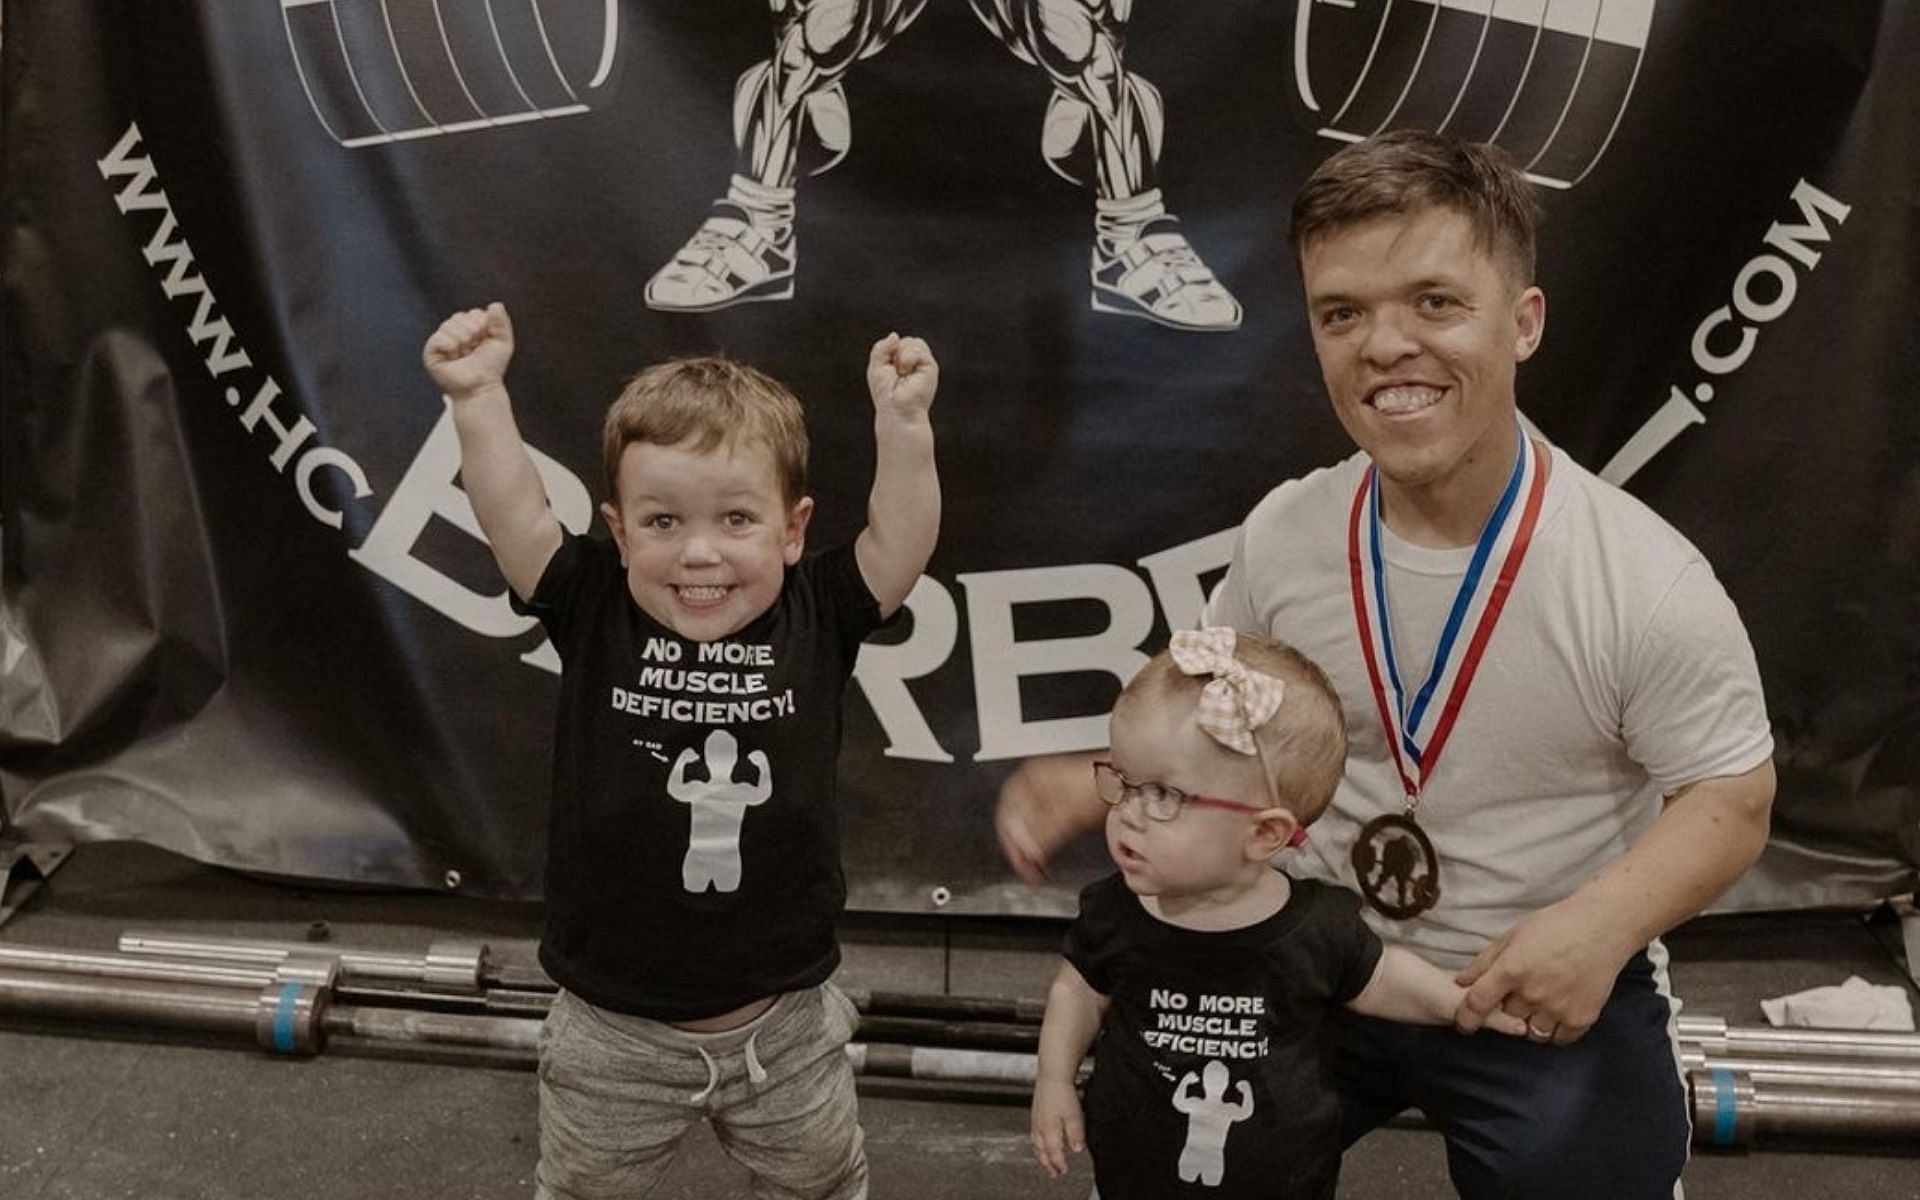 Zach breaks national weightlifting record on Little People, Big World Episode 2 airing on May 24 (Image via zroloff07/Instagram)